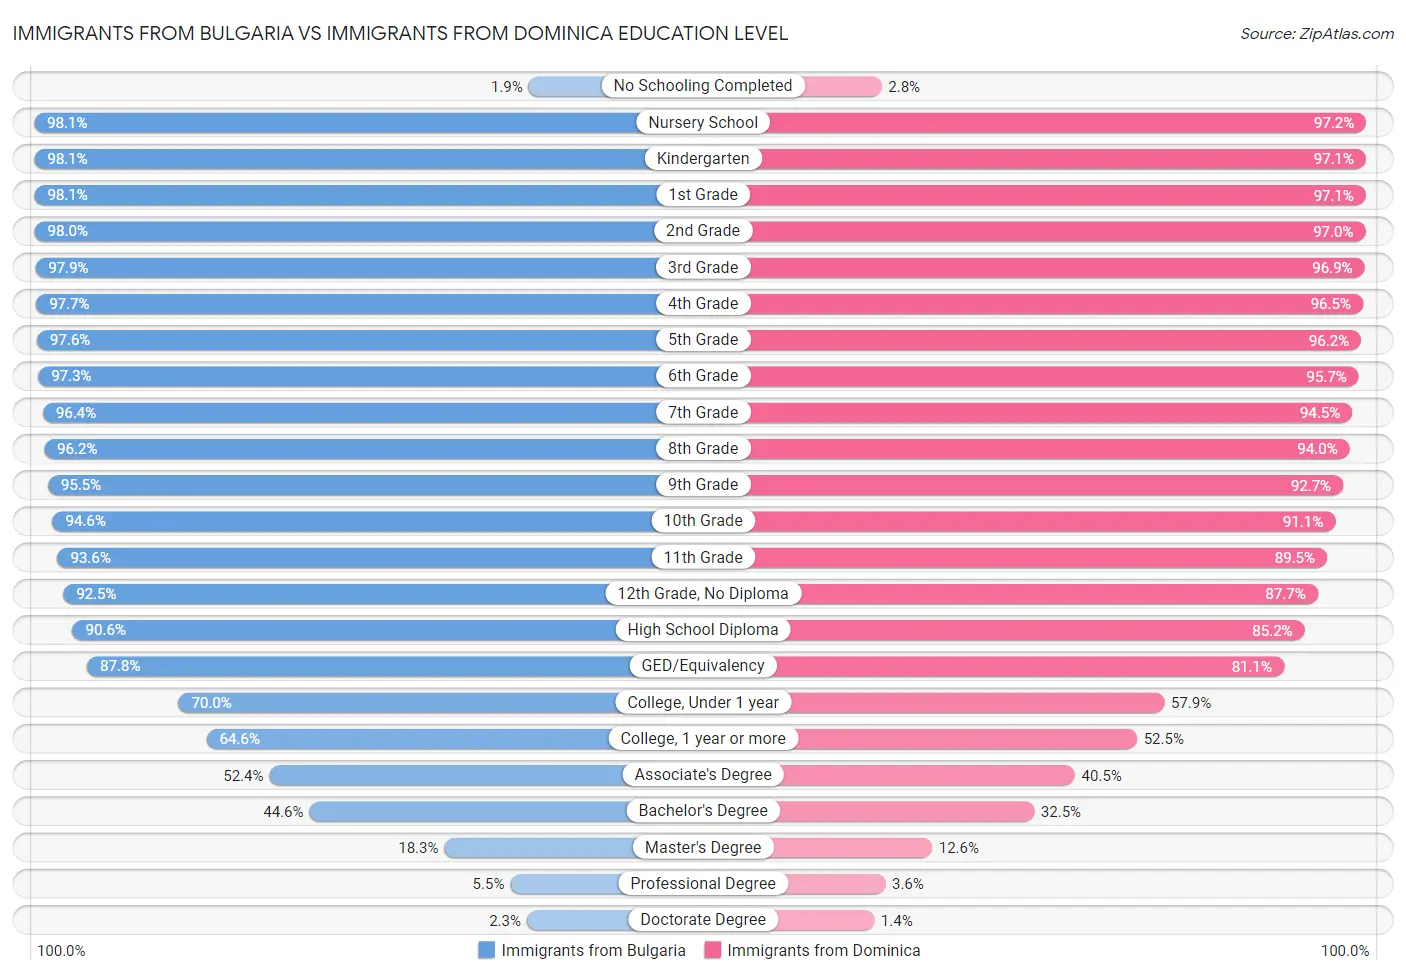 Immigrants from Bulgaria vs Immigrants from Dominica Education Level